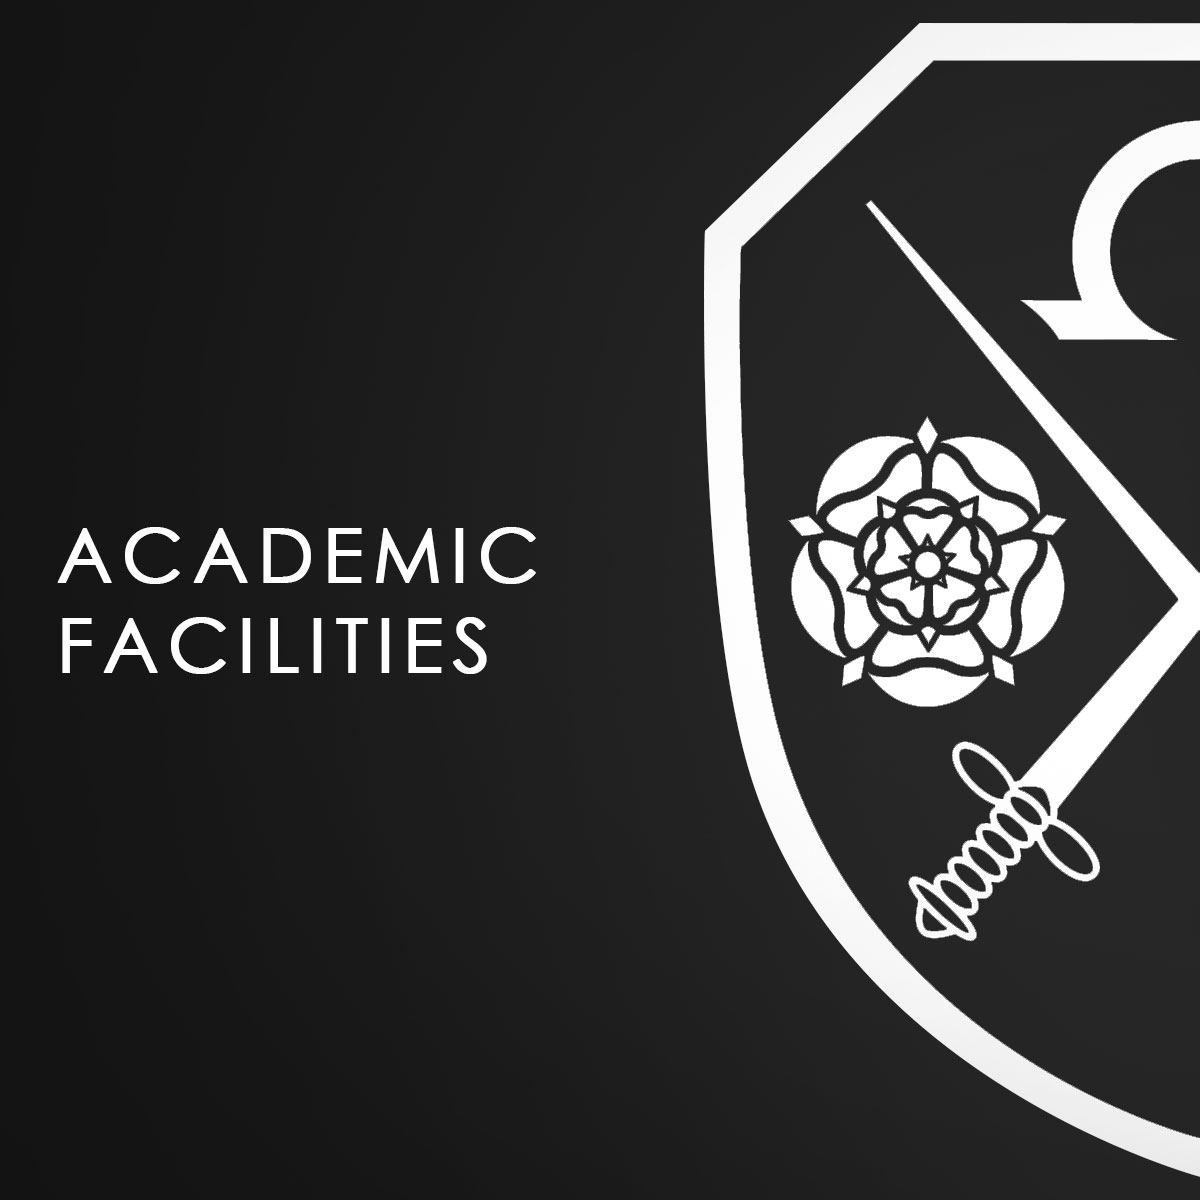 A black background with the East Barnet School logo which says Academic Facilities